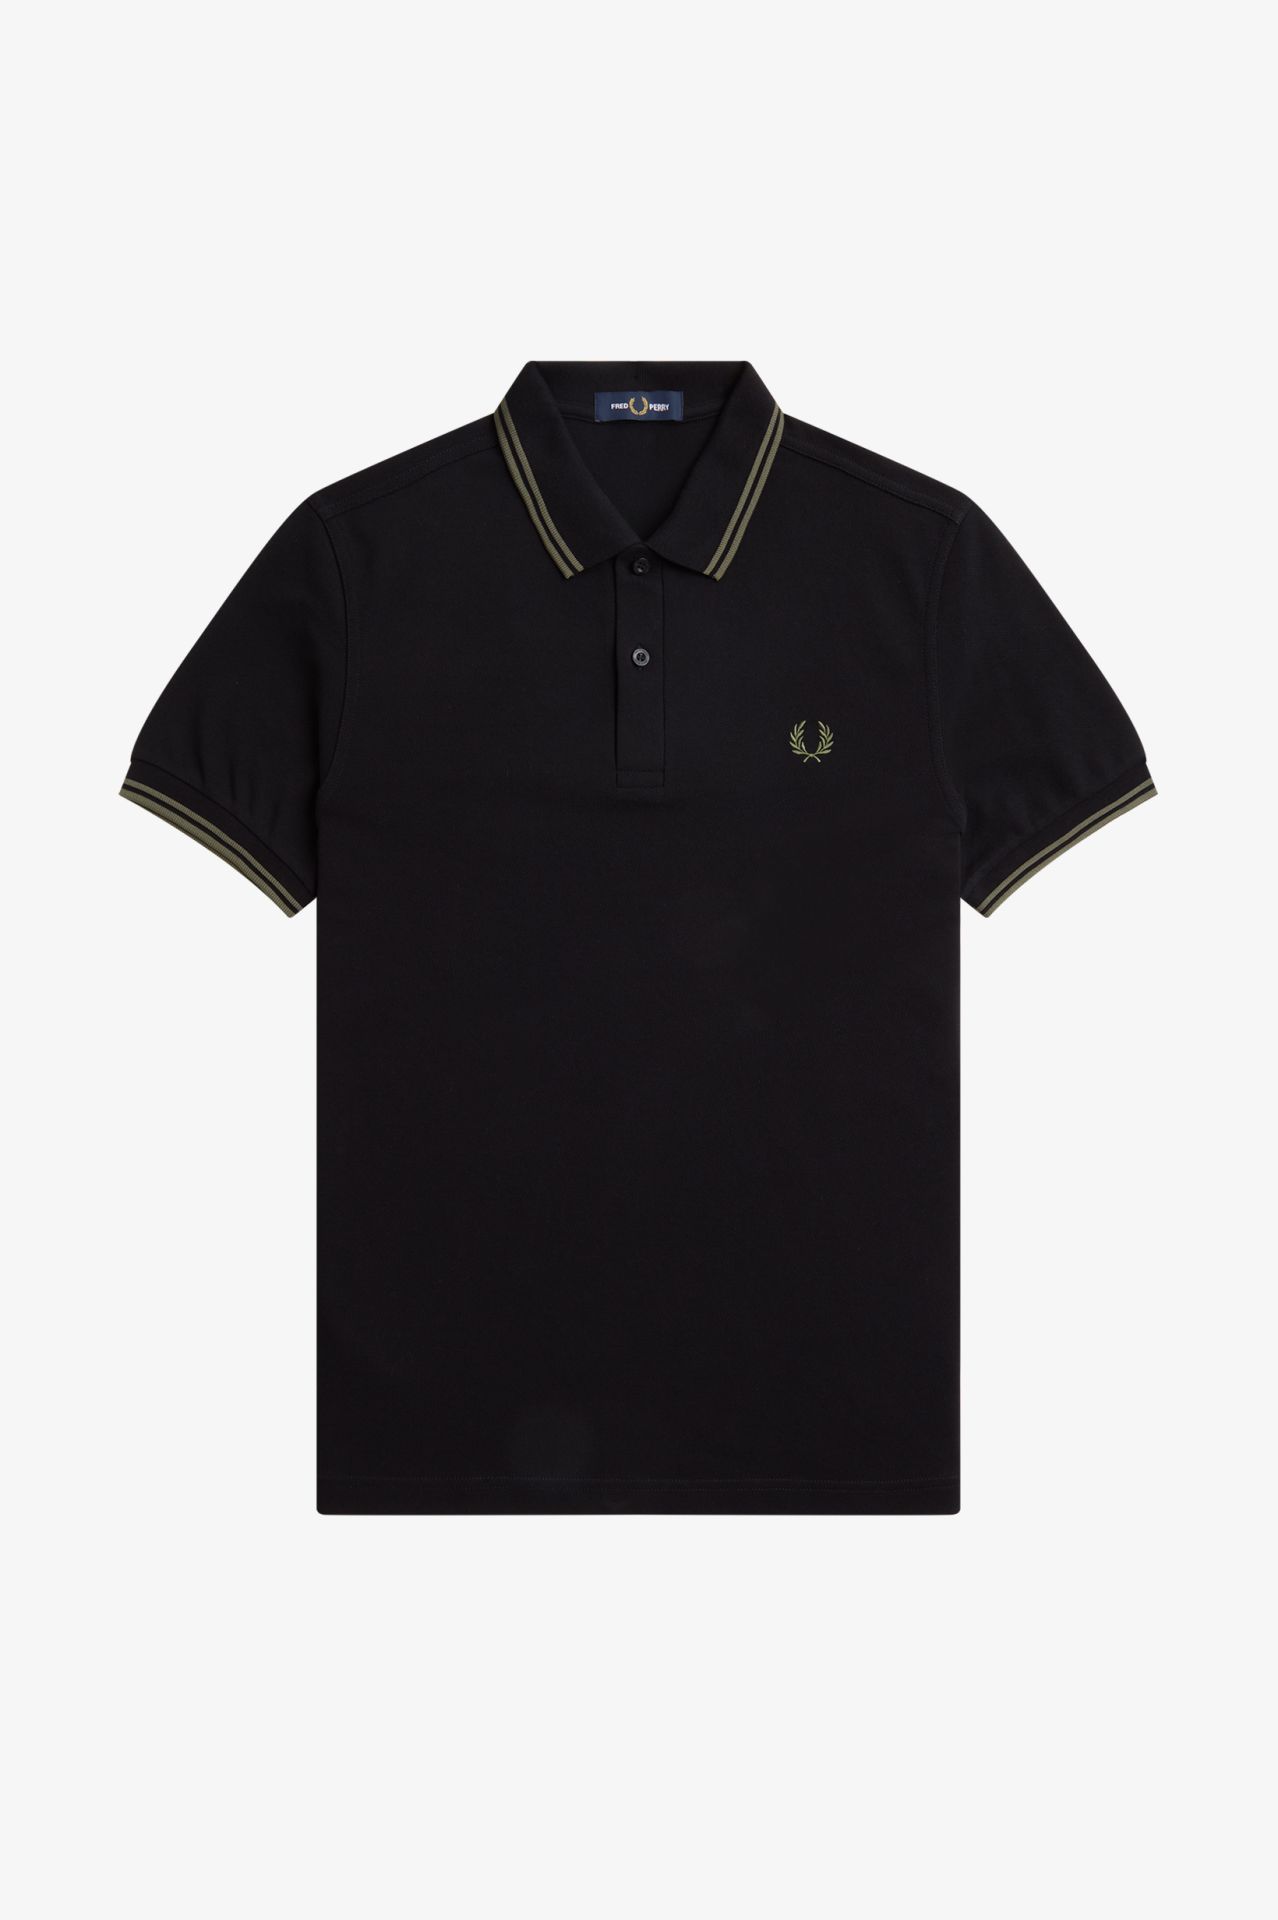 Fred Perry Twin Tipped Shirt in Black/Green 